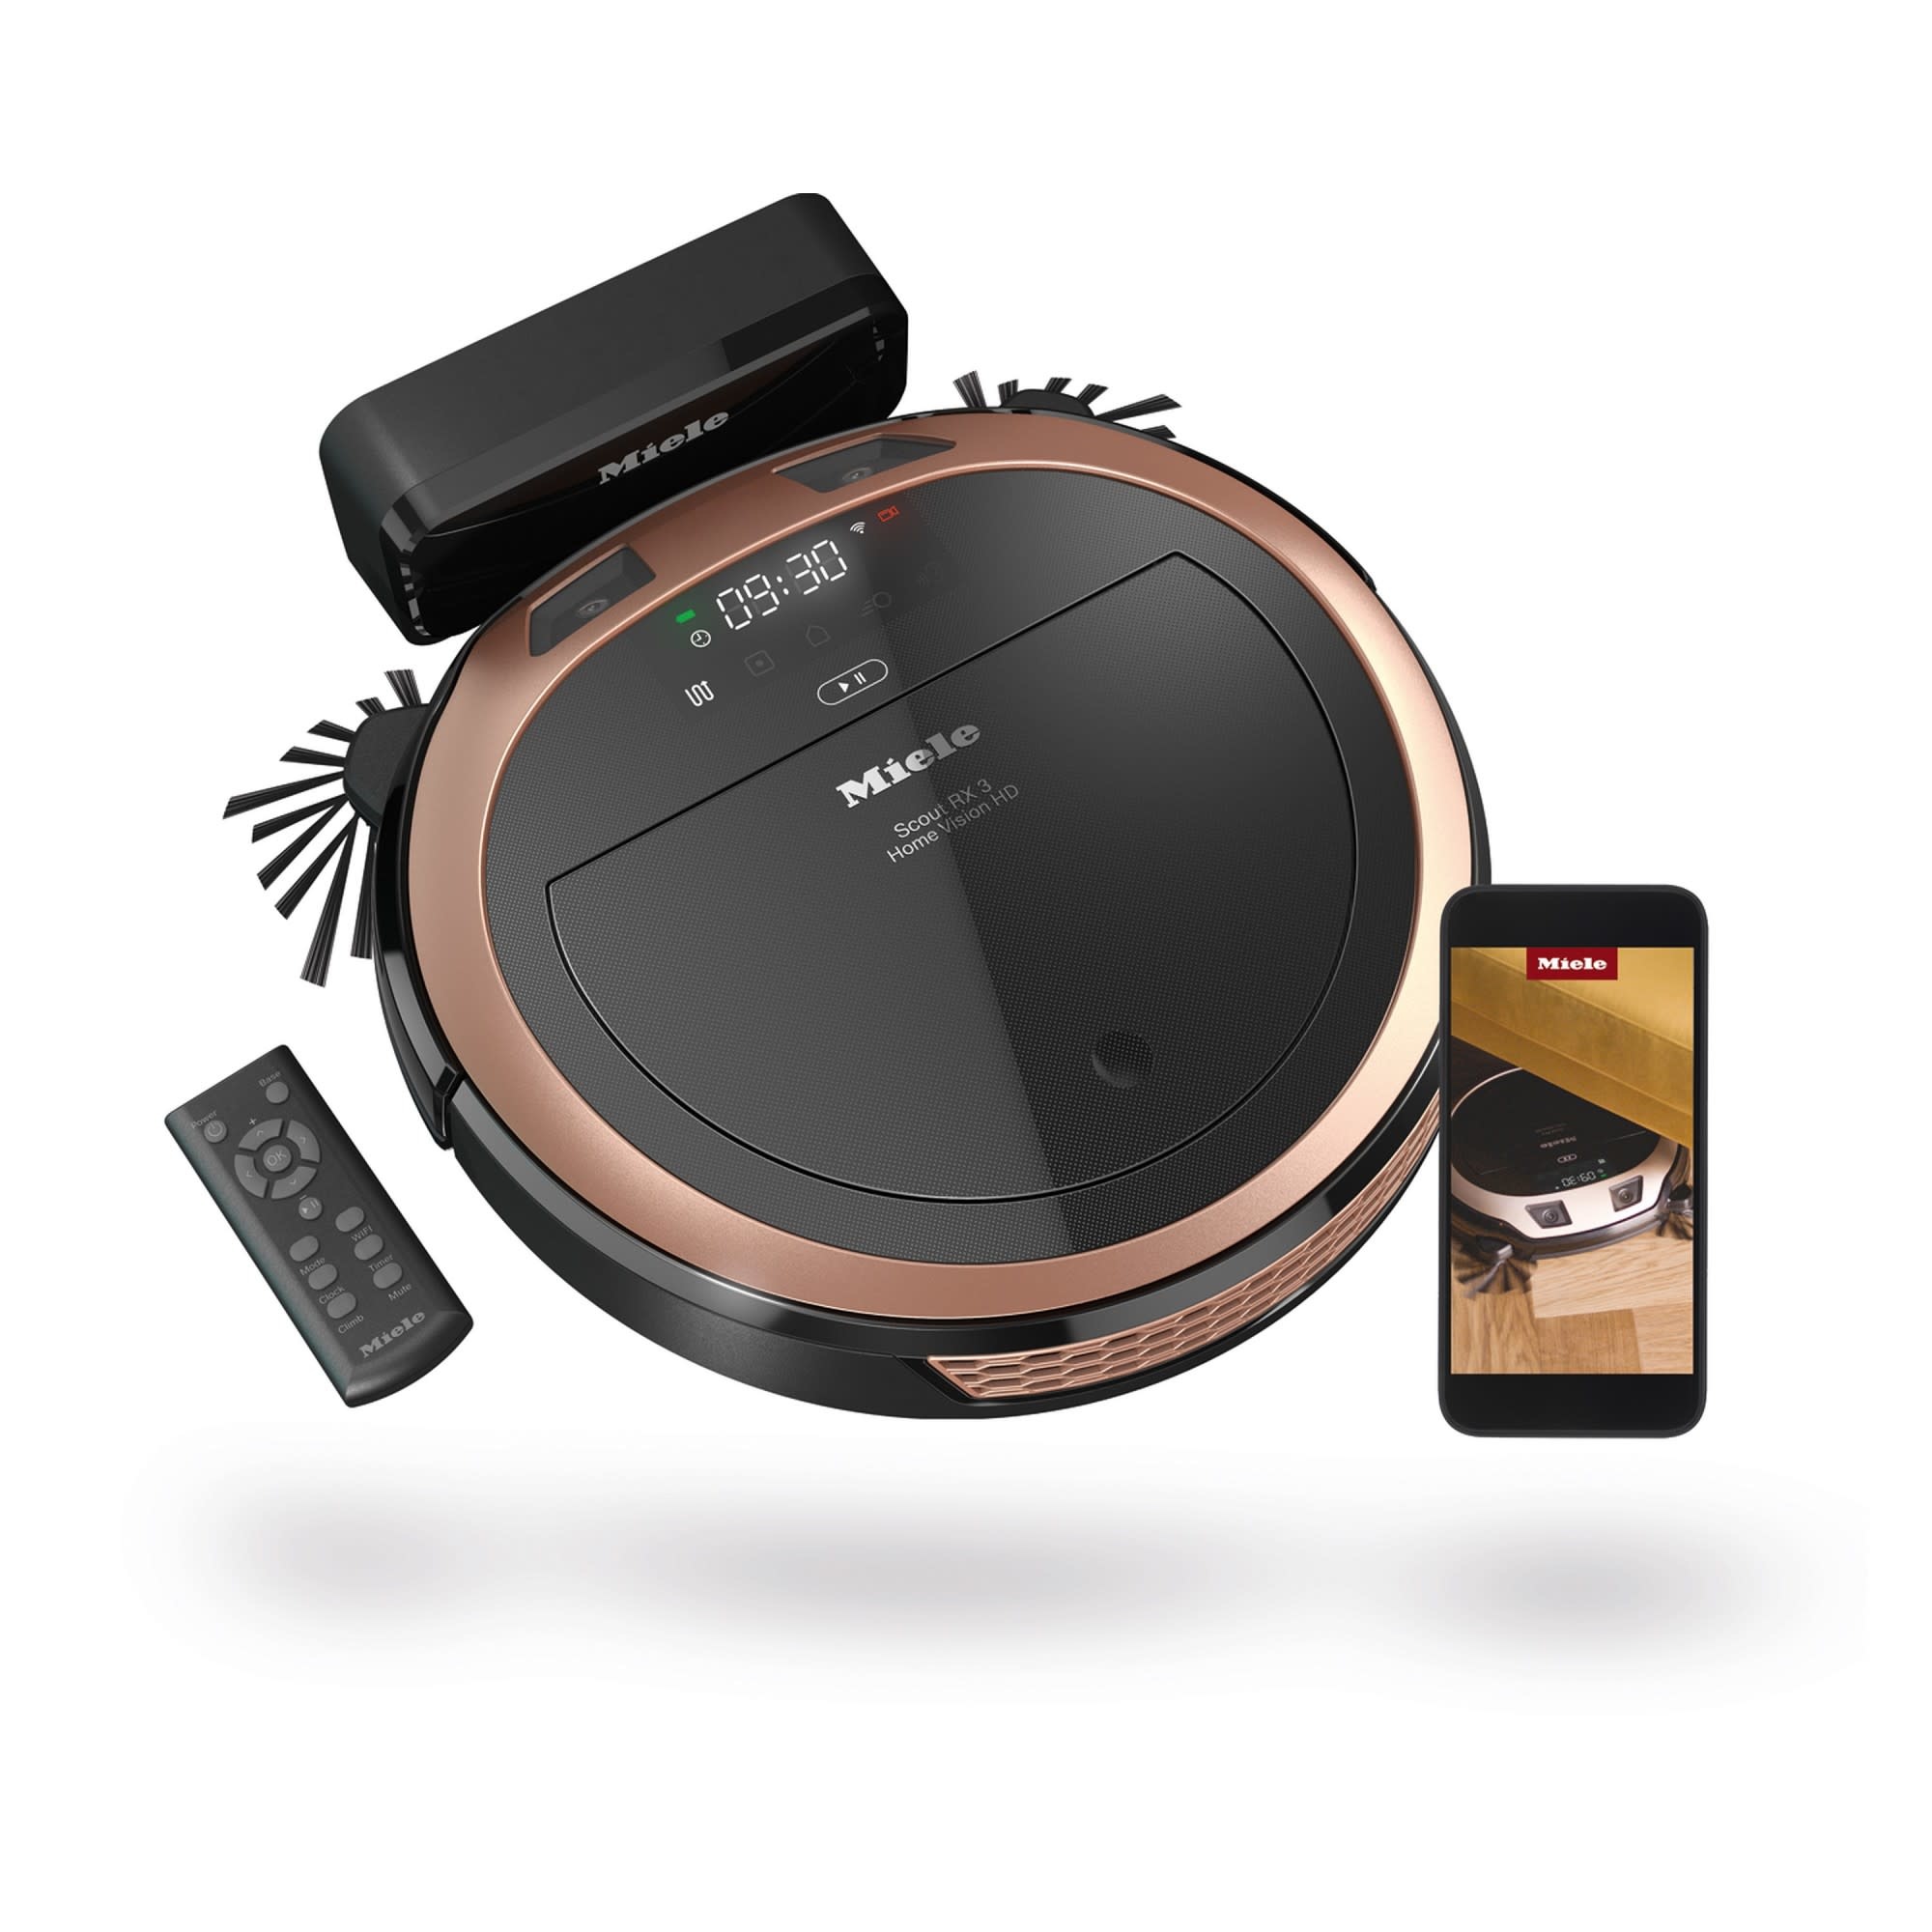 Miele Robot - RX3 Home Vision (Rose Gold) - - Vacuums Etc